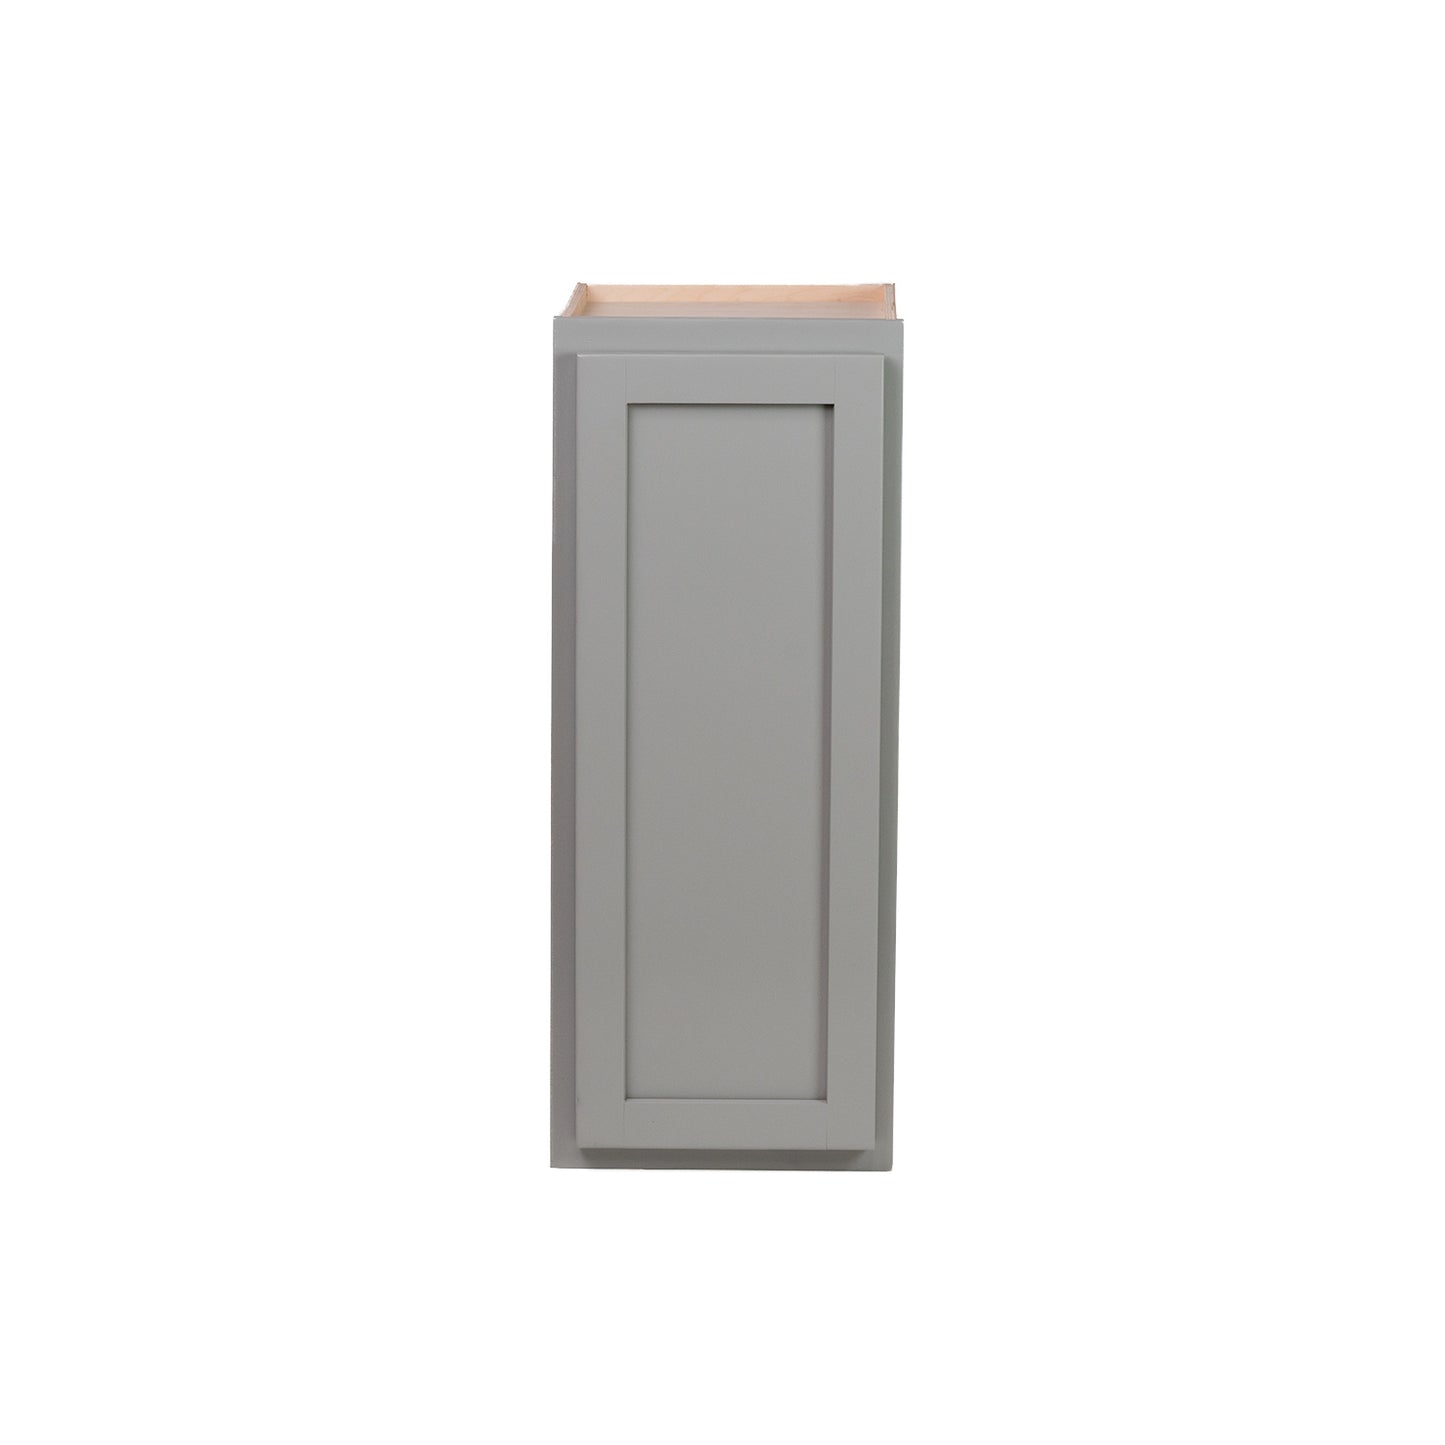 Quicklock RTA (Ready-to-Assemble) Magnetic Gray Wall Cabinet- Slim 36"H x (9", 12", 15"W)